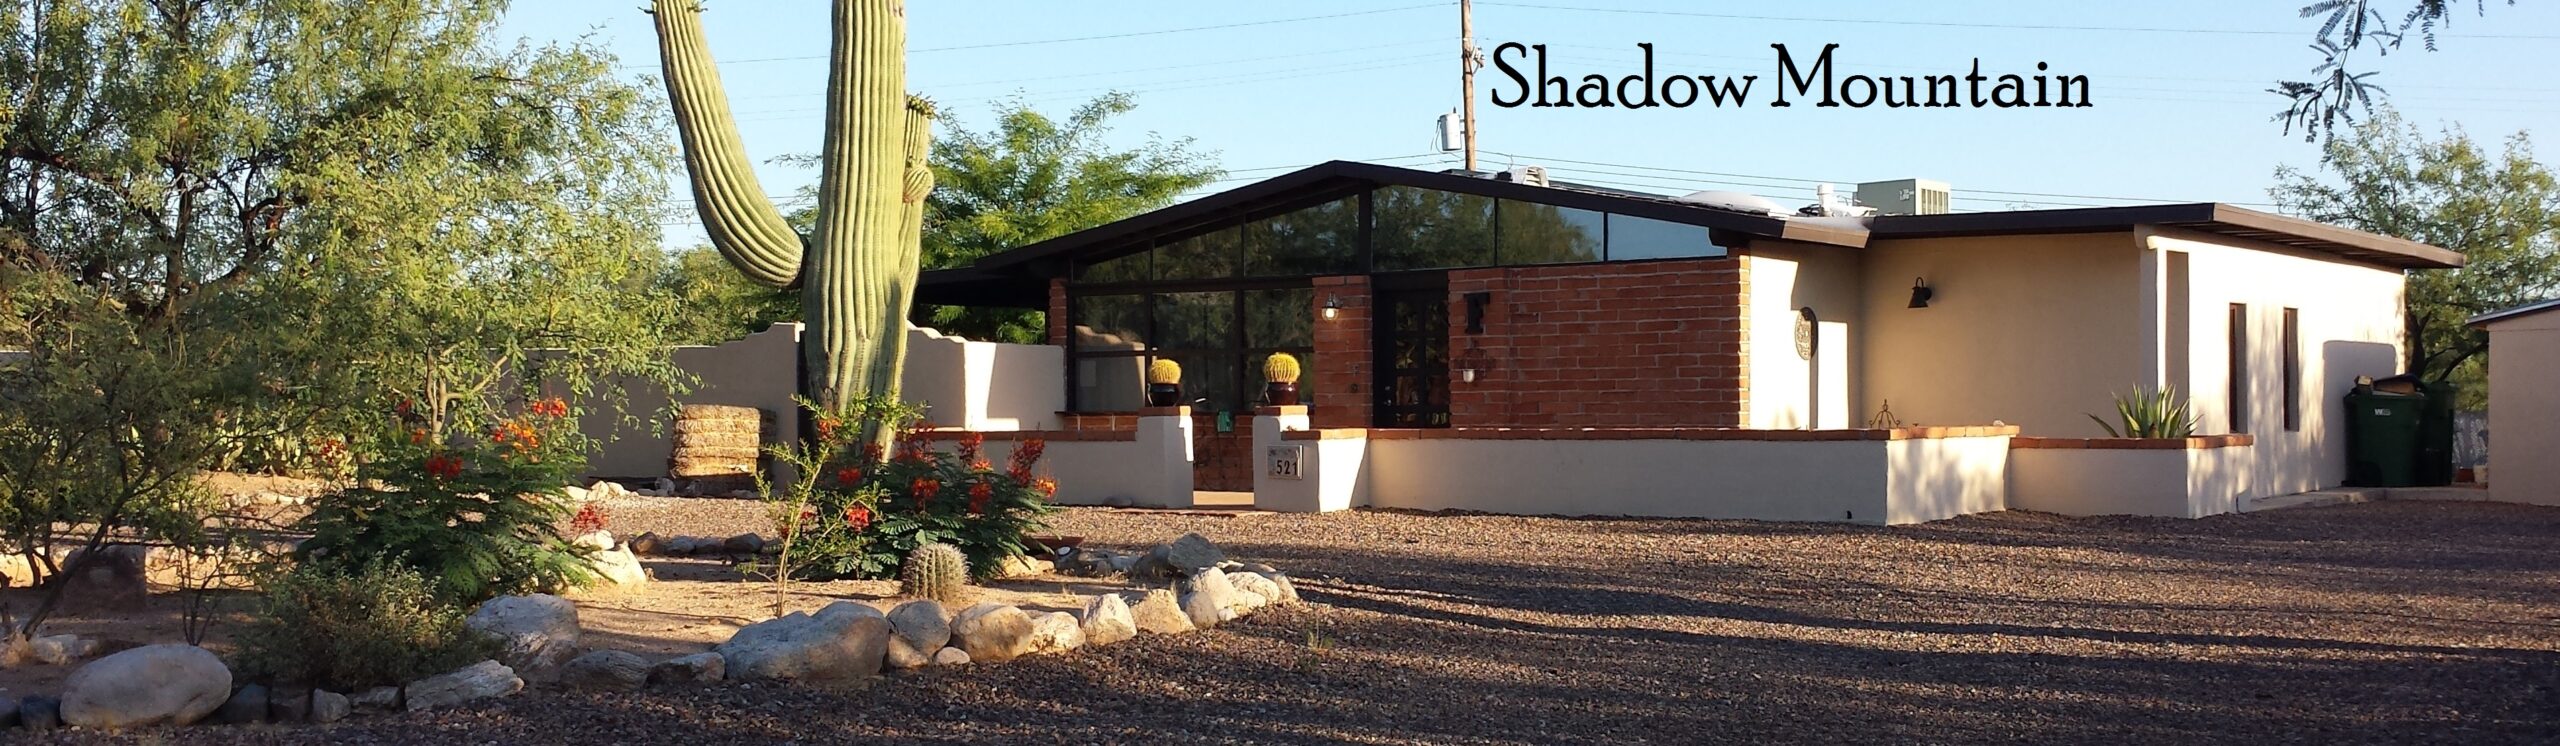 Shadow Mountain home in Oro Valley just northwest of Tucson